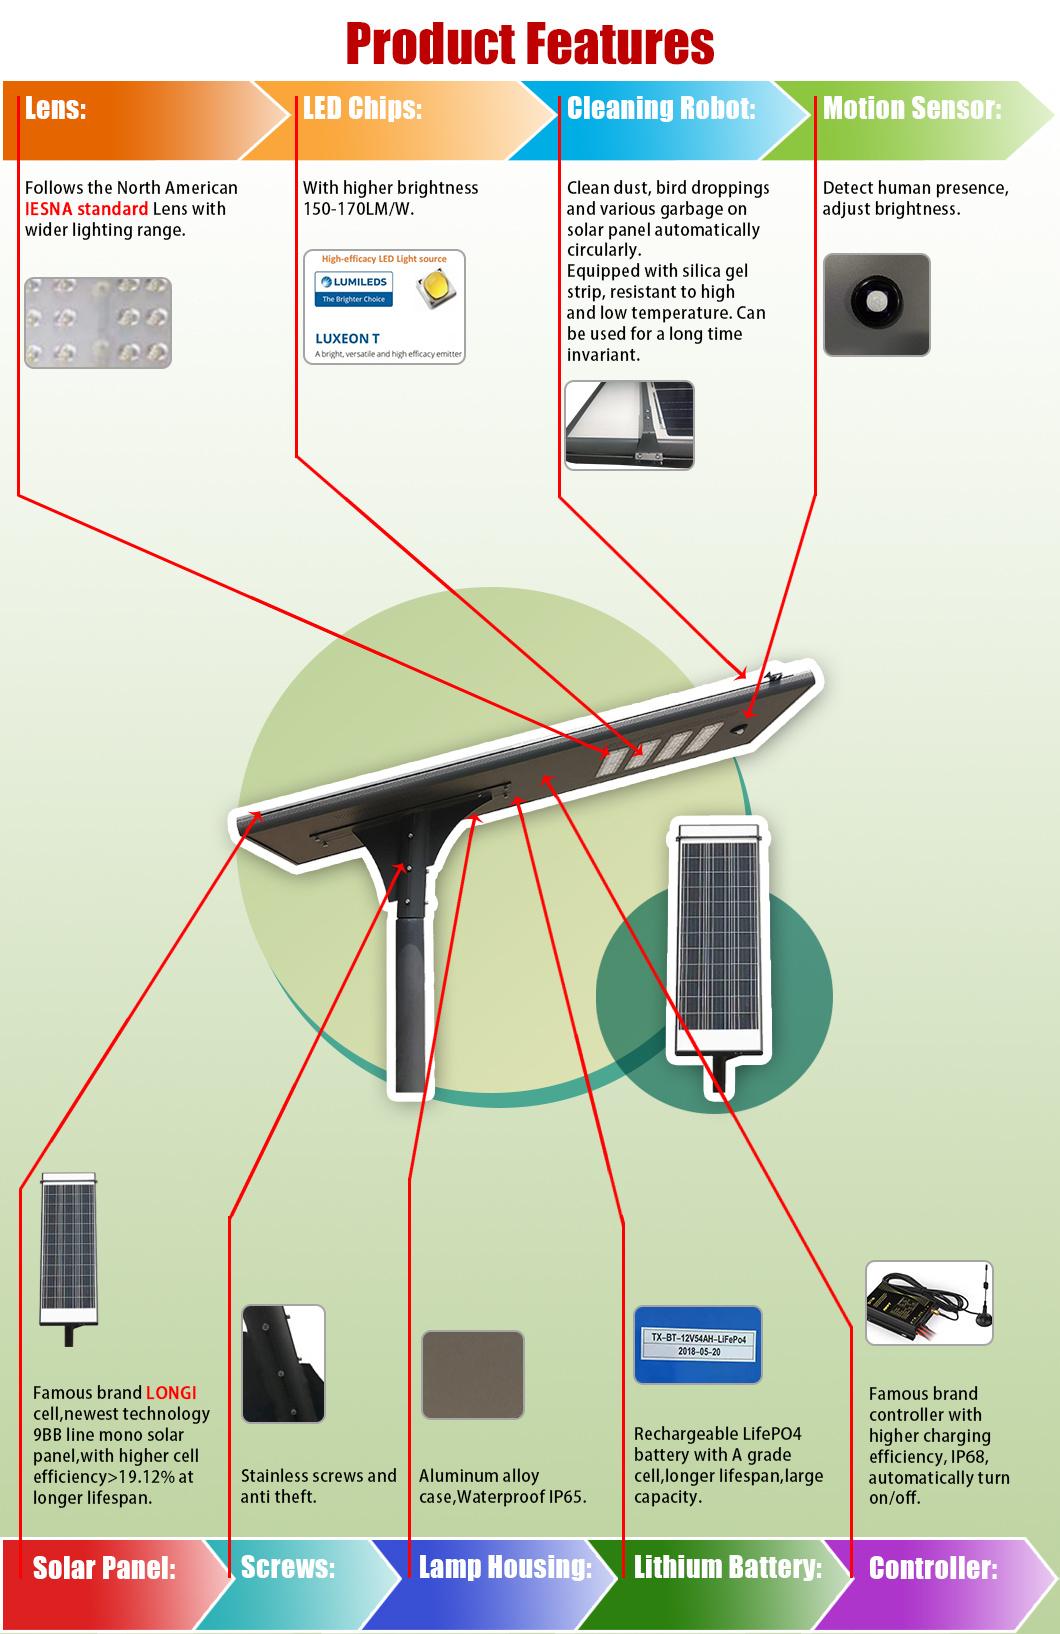 Outdoor 30W 60W 80W 100W IP65 All in One Integrated Auto-Cleaning LED Solar Street Light